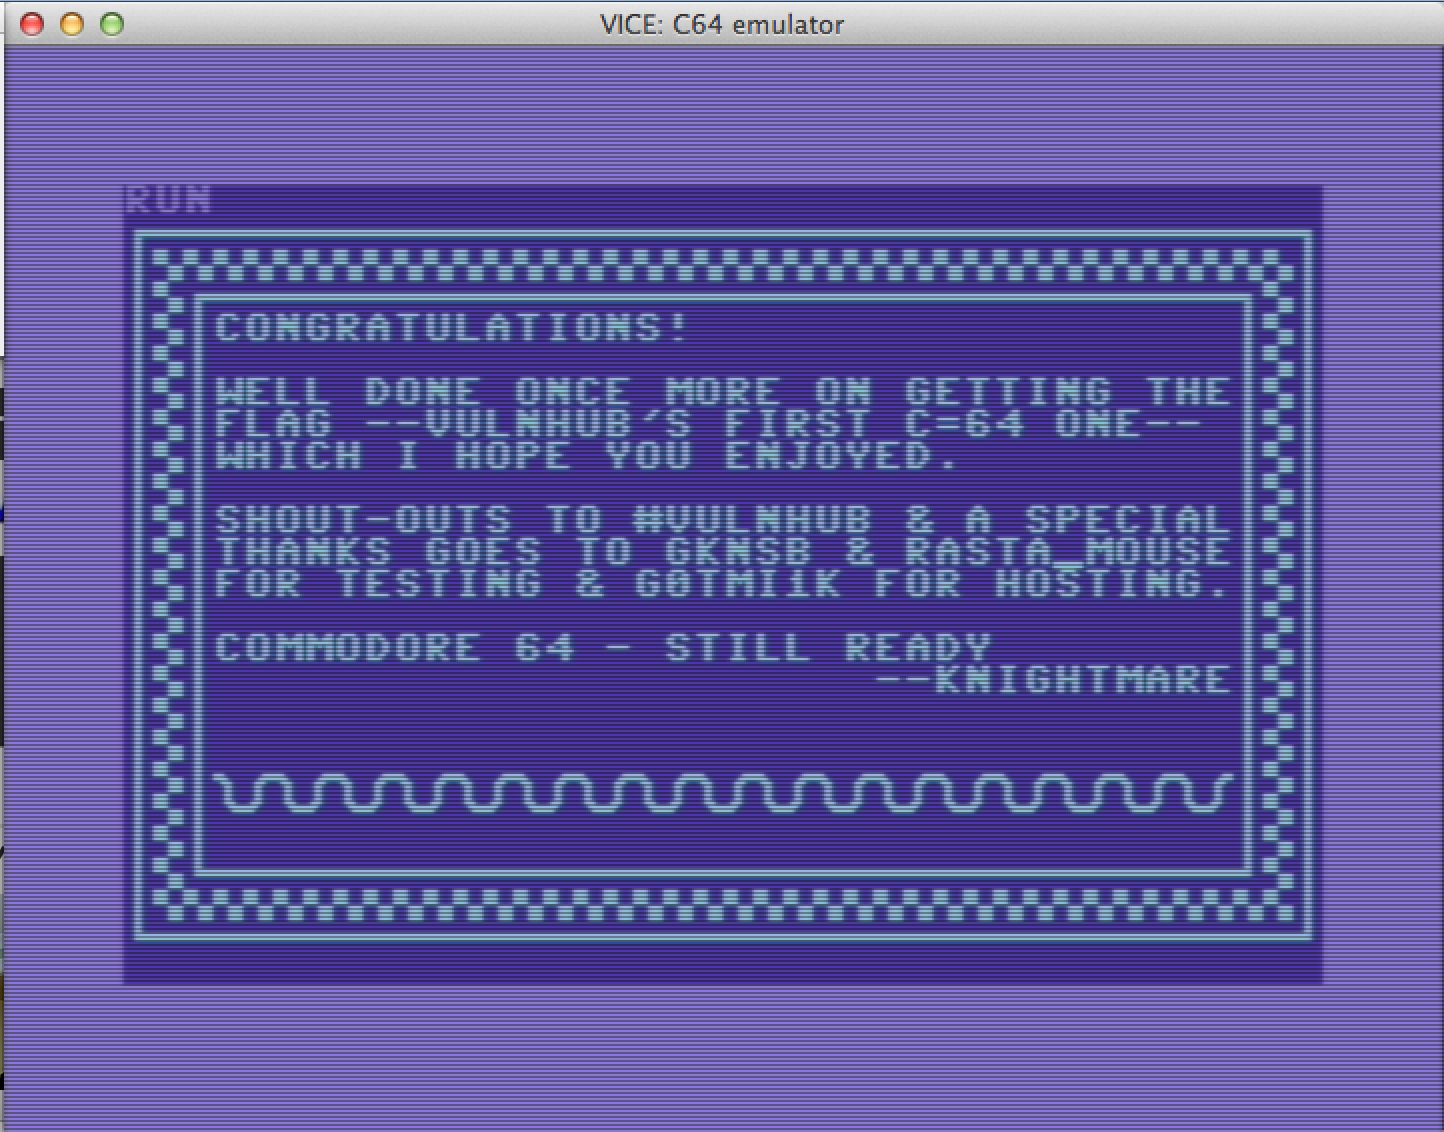 congratulations text made to look like a c64 basic screen